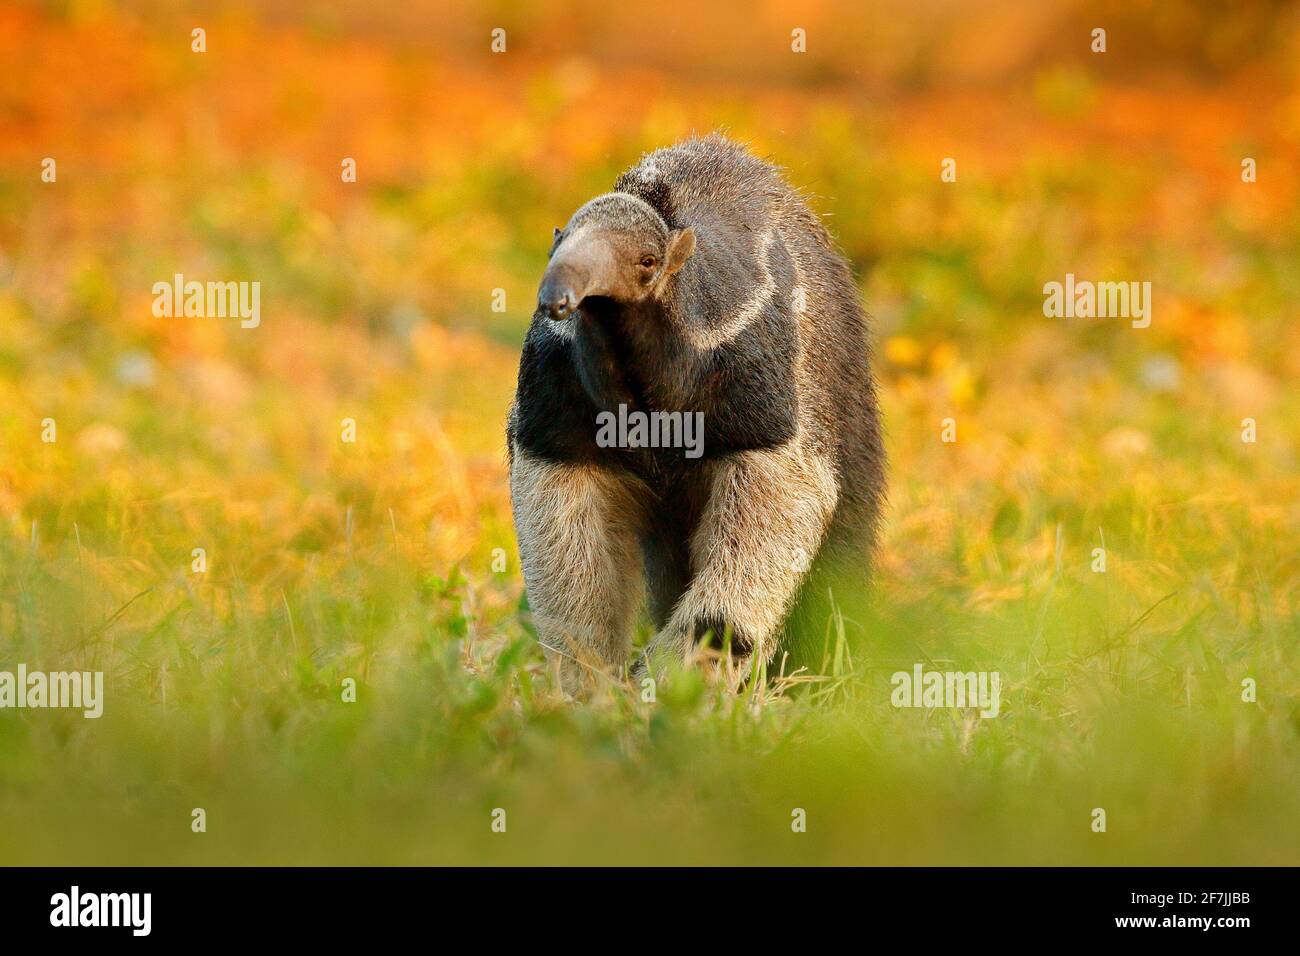 Anteater, cute animal from Brazil. Giant Anteater, Myrmecophaga tridactyla, animal with long tail and log muzzle nose, Pantanal, Brazil. Wildlife scen Stock Photo